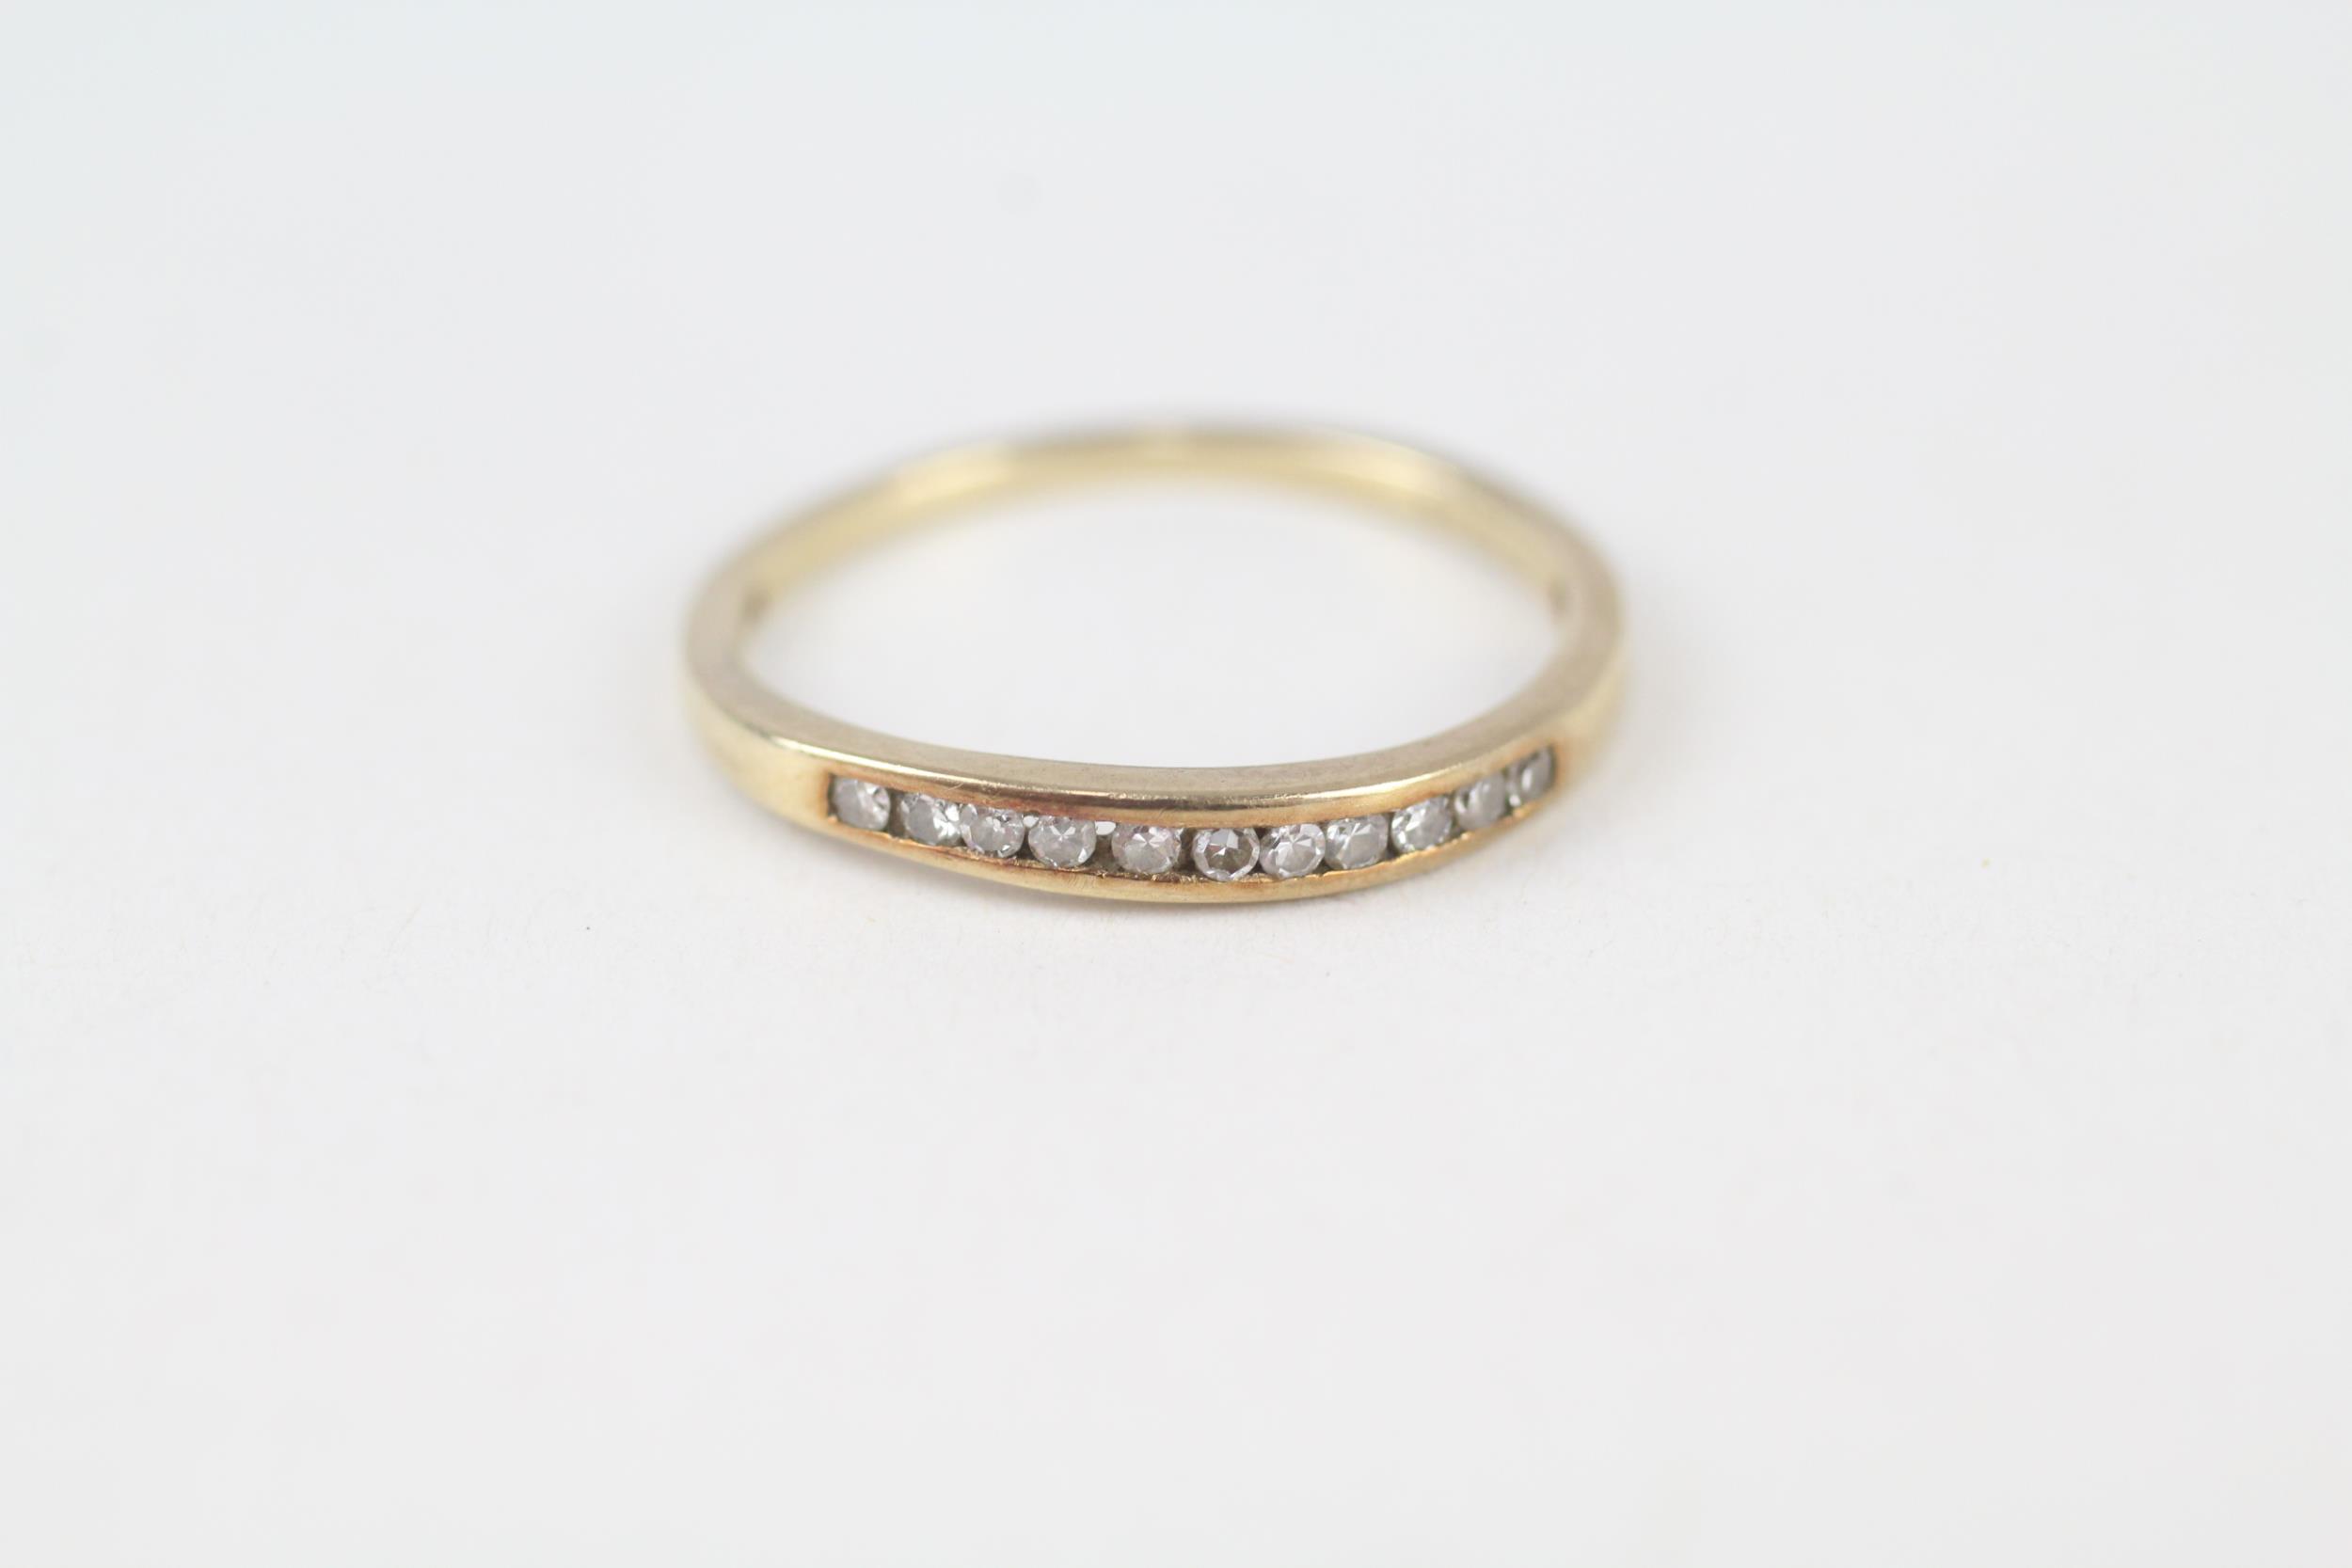 9ct gold channel set diamond half eternity ring Size L 1.1 g - Image 2 of 5